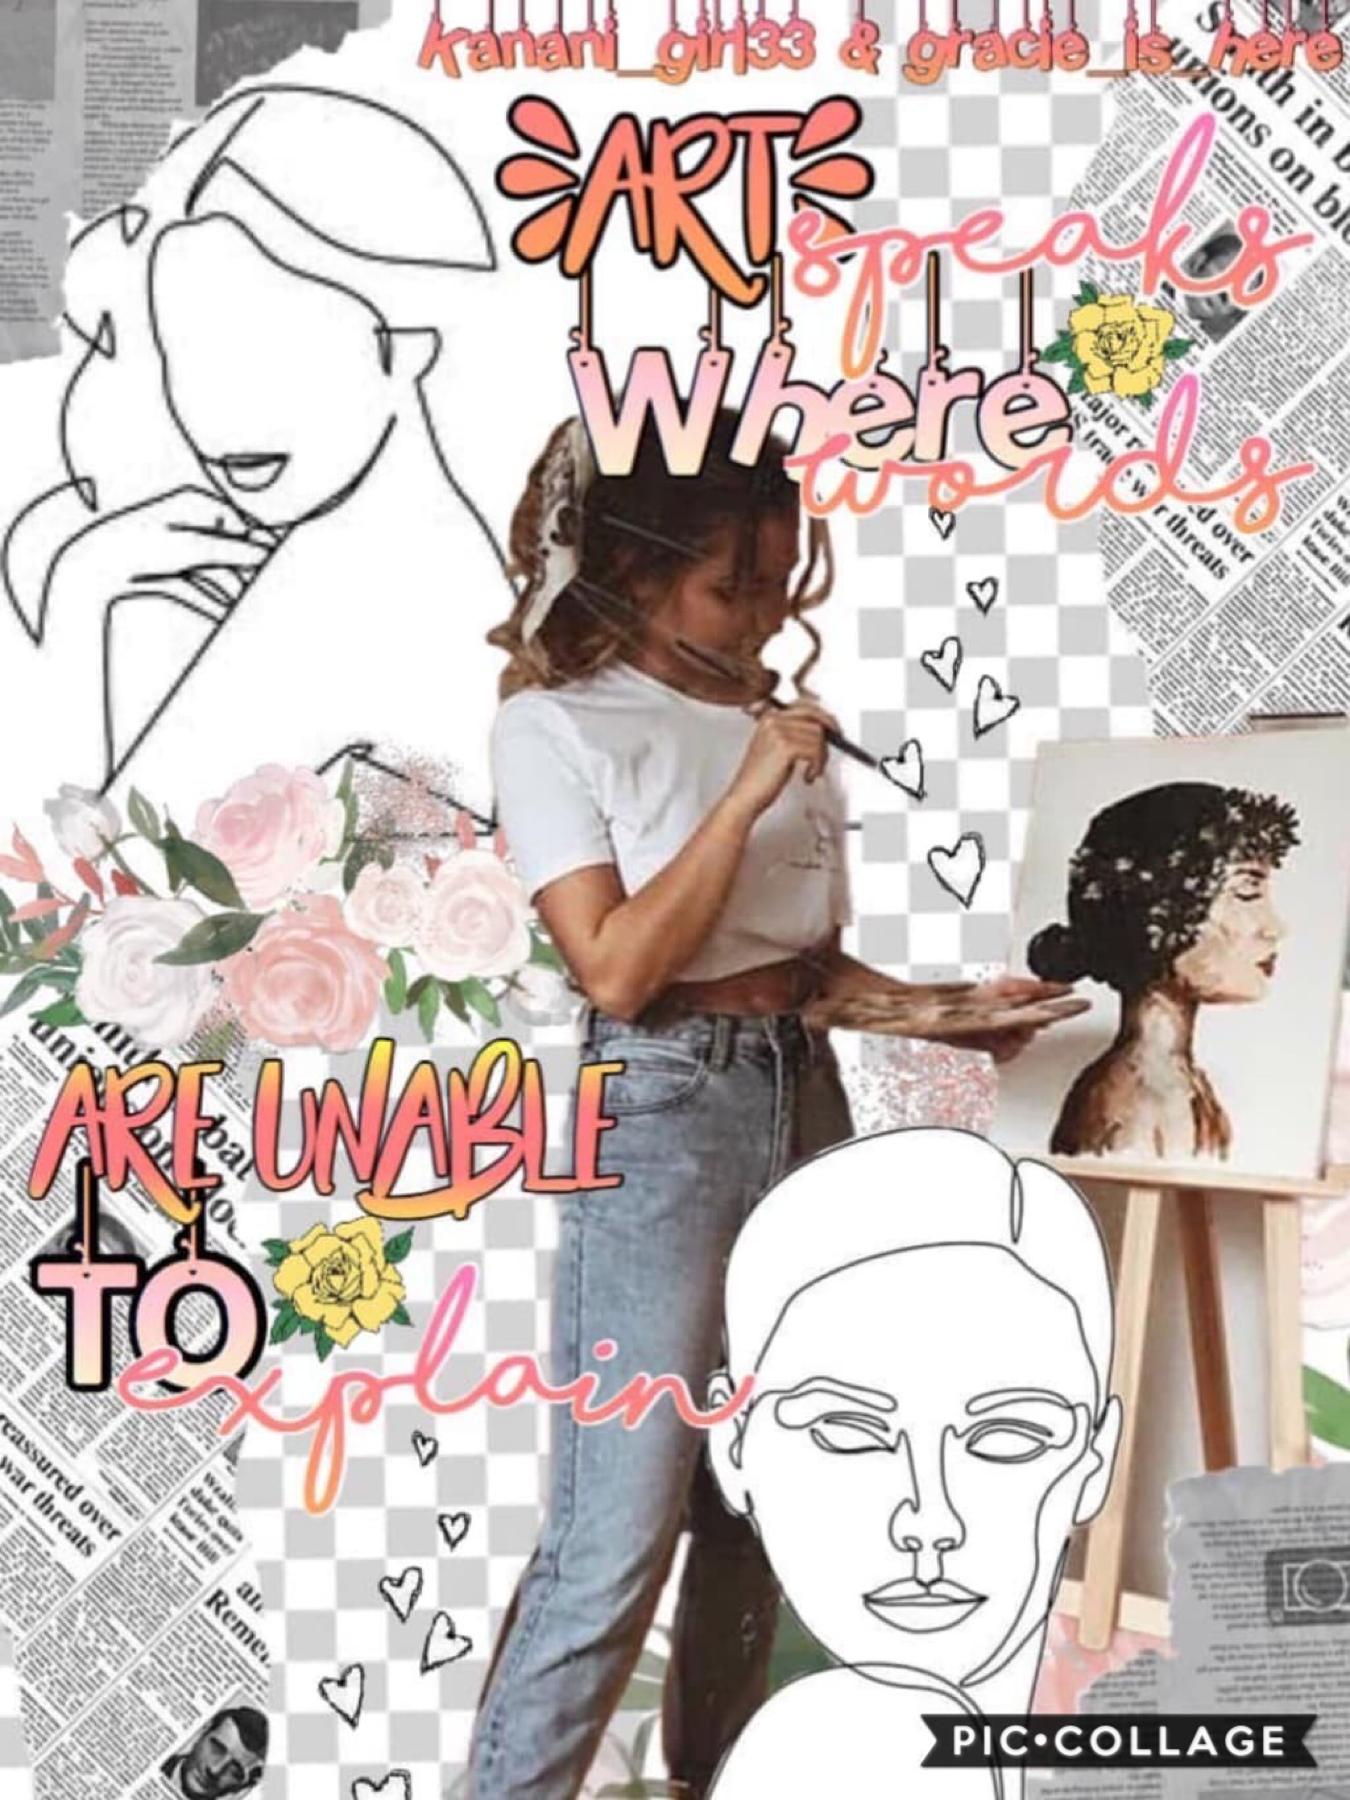 🥳 collab with the amaaaazing... 🤩
KANANI_GIRL33! She is sooo talented and amazing be sure to give her account a follow! ❤️❤️💕💕🥳🥳🤩🤩🤩